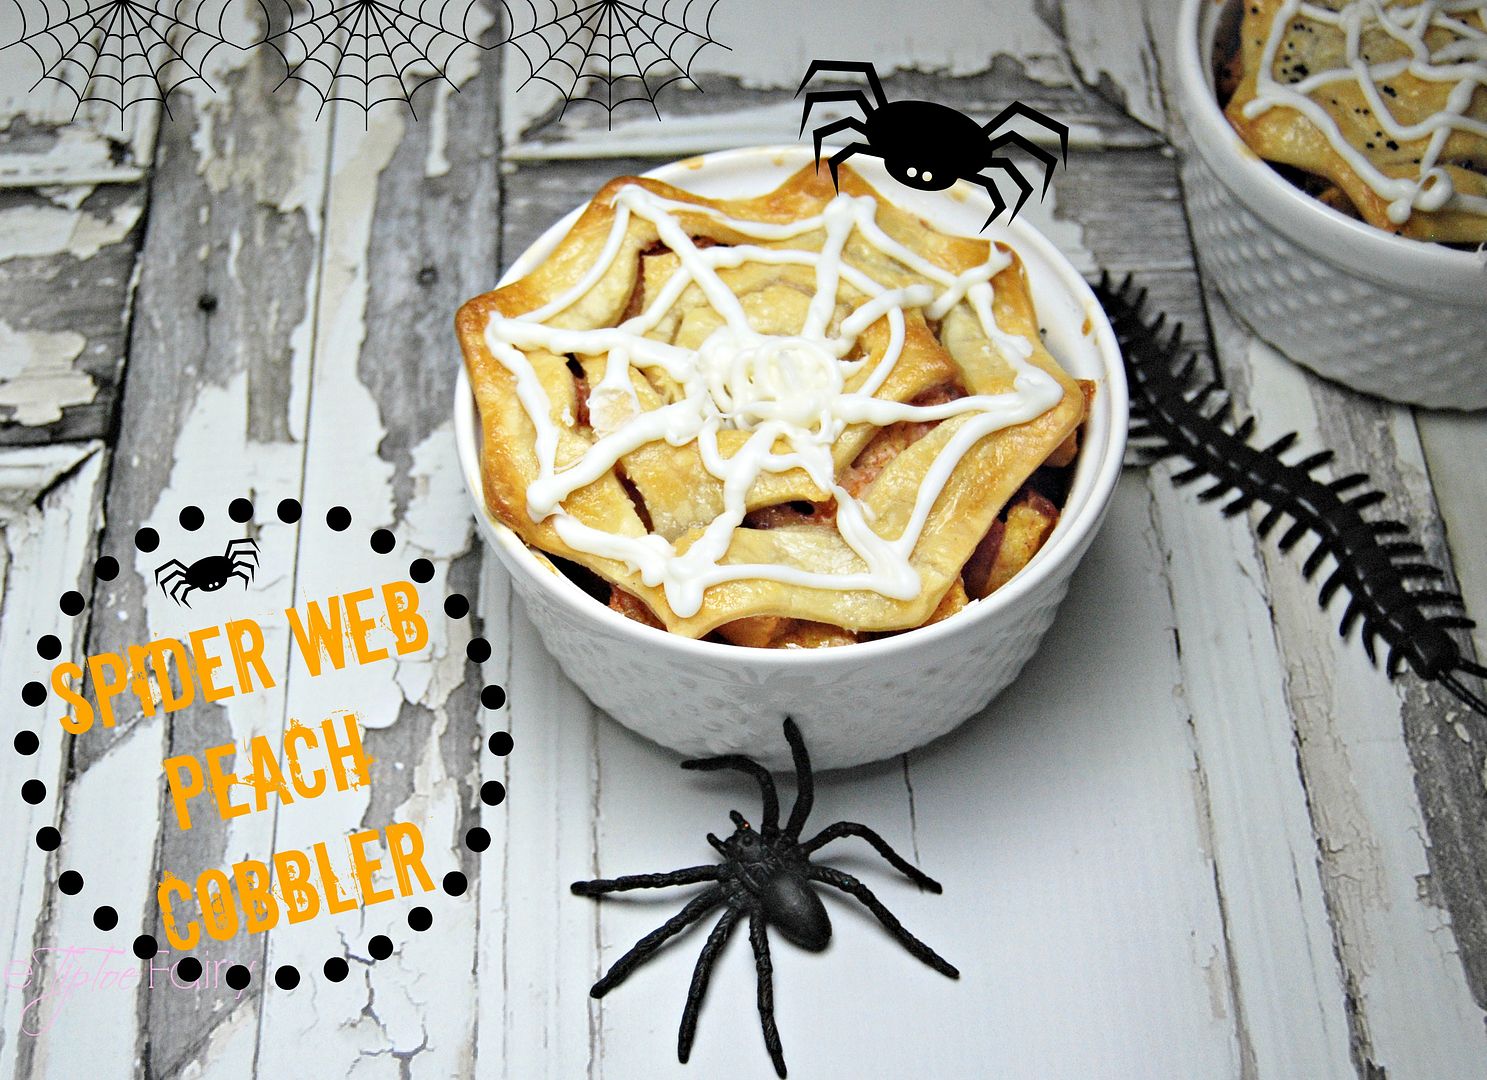 Make Spider Web Mini Peach Cobblers with spider web cookie cutters | The TipToeFairy #halloweentreats #halloweenrecipes #peachrecipes #peachcobbler